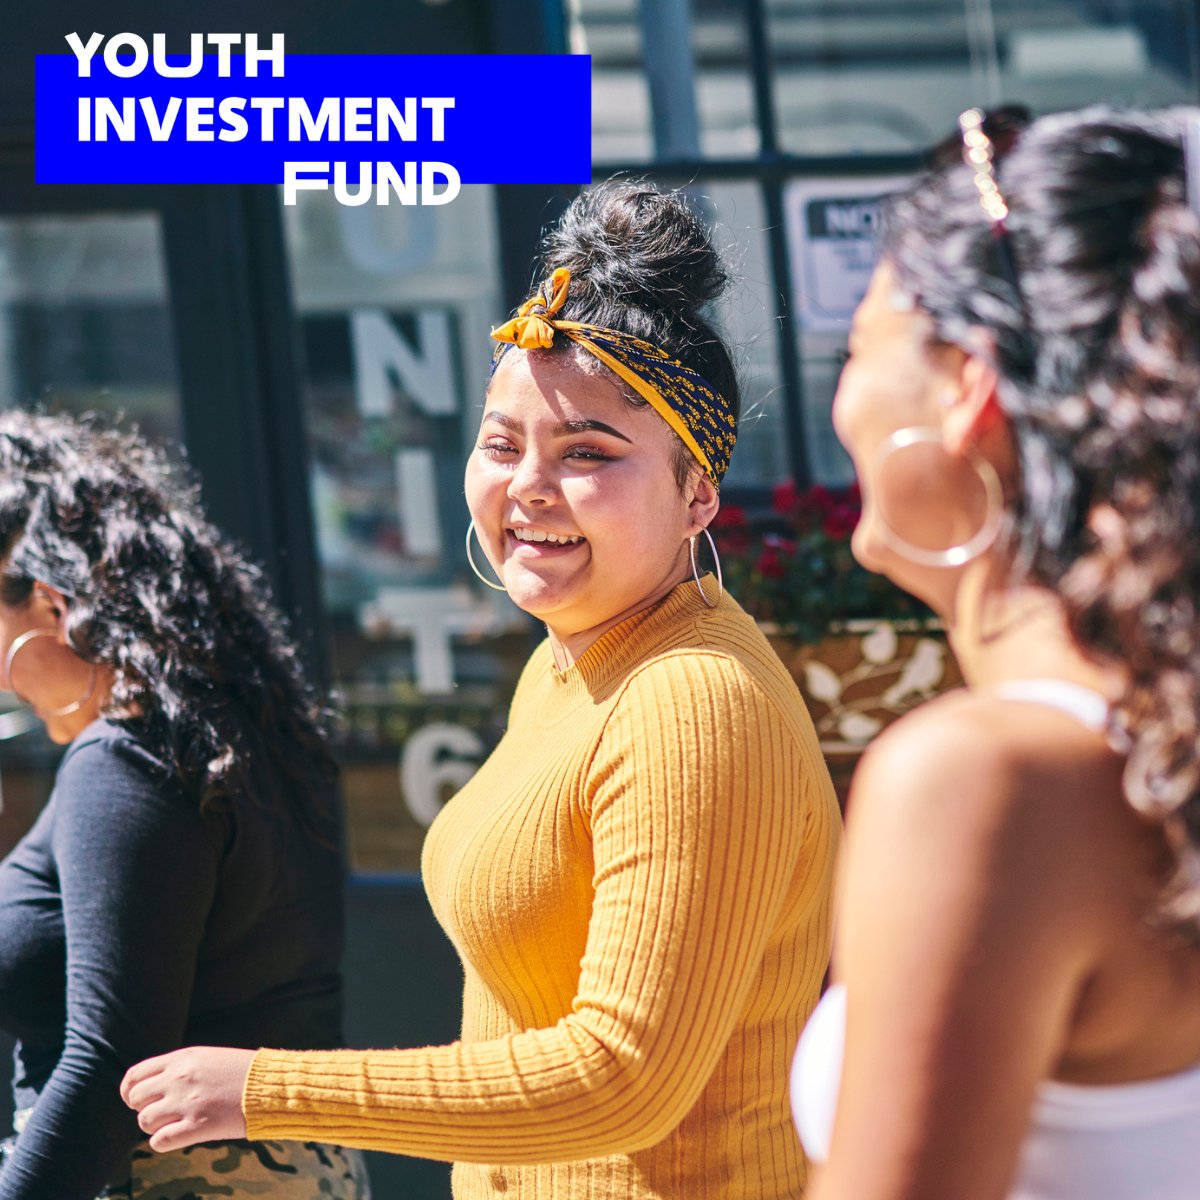 Young people are celebrating today! Over £90M of #YouthInvestmentFund grants @DCMS awarded to 140 youth services in underserved areas of England. It means thousands more young people can access new opportunities to improve health, skills & wellbeing ➡️ youthinvestmentfund.org.uk/news/